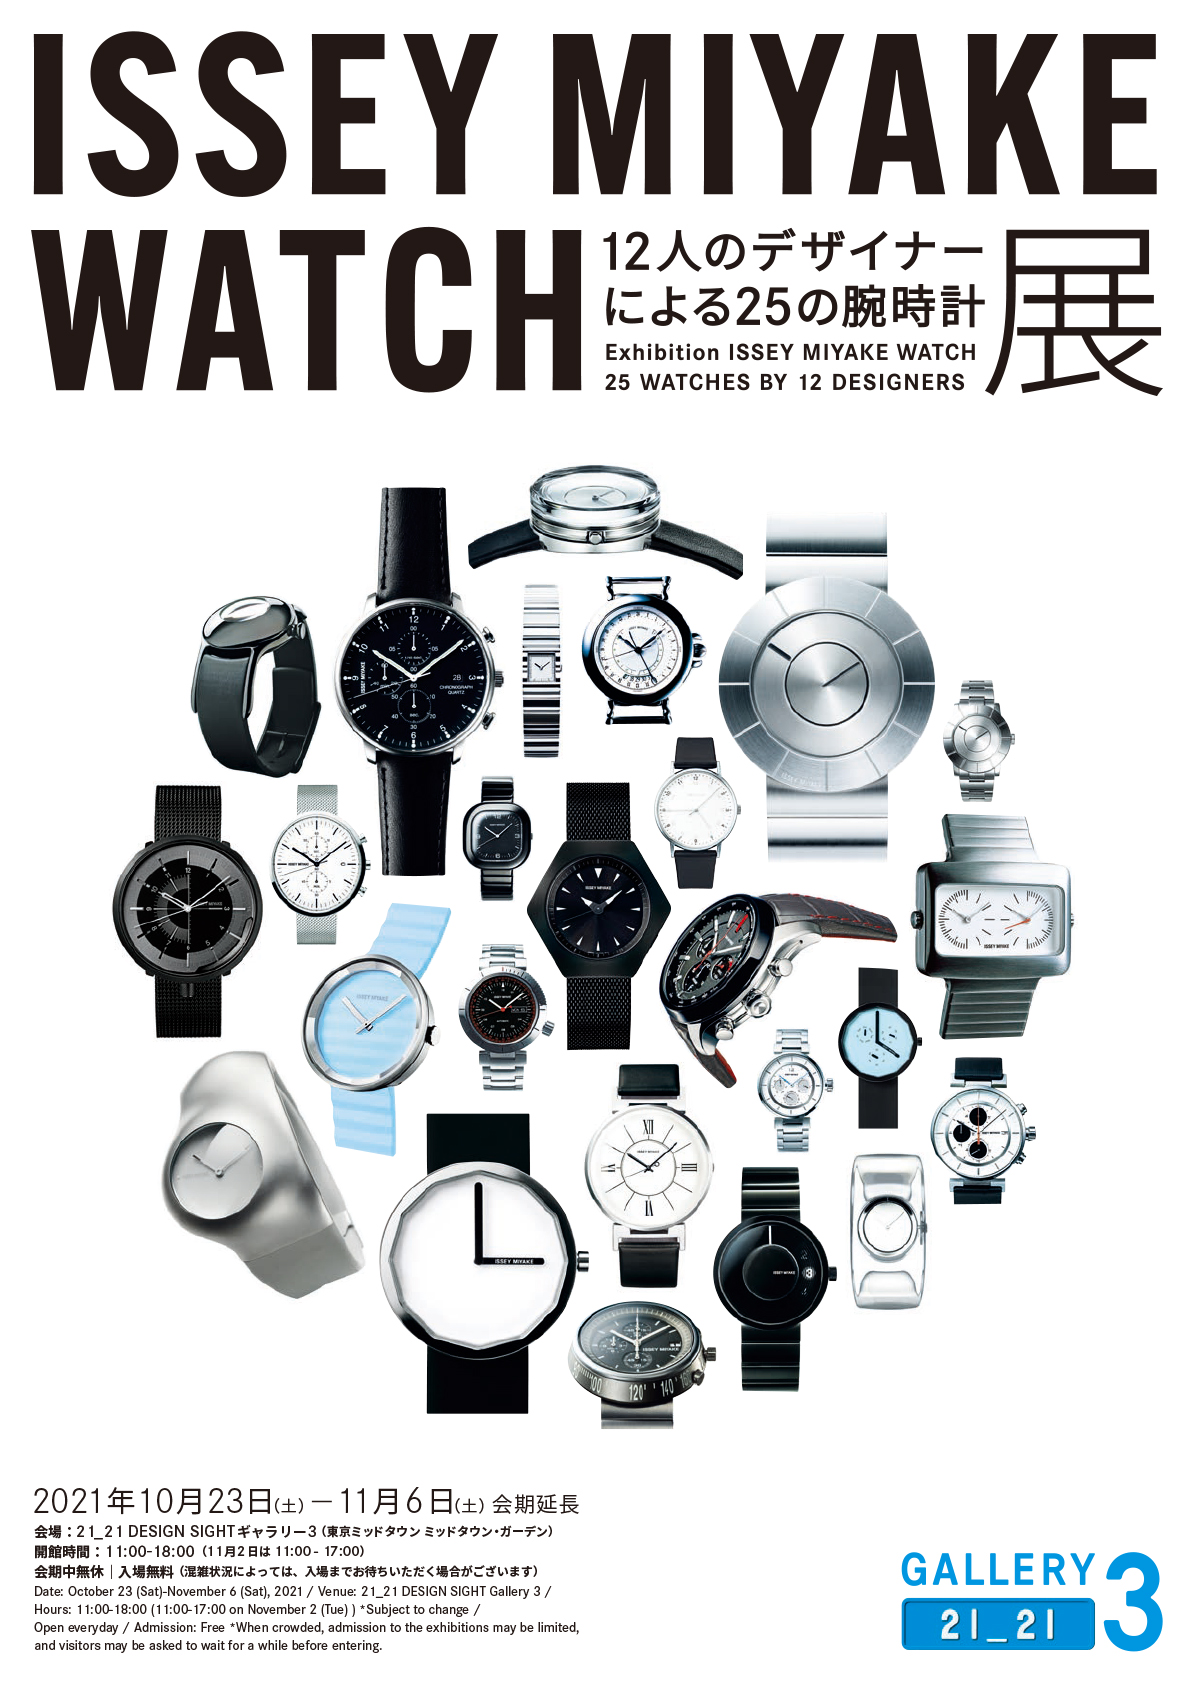 The event has ended.] “Exhibition ISSEY MIYAKE WATCH 25 WATCHES BY